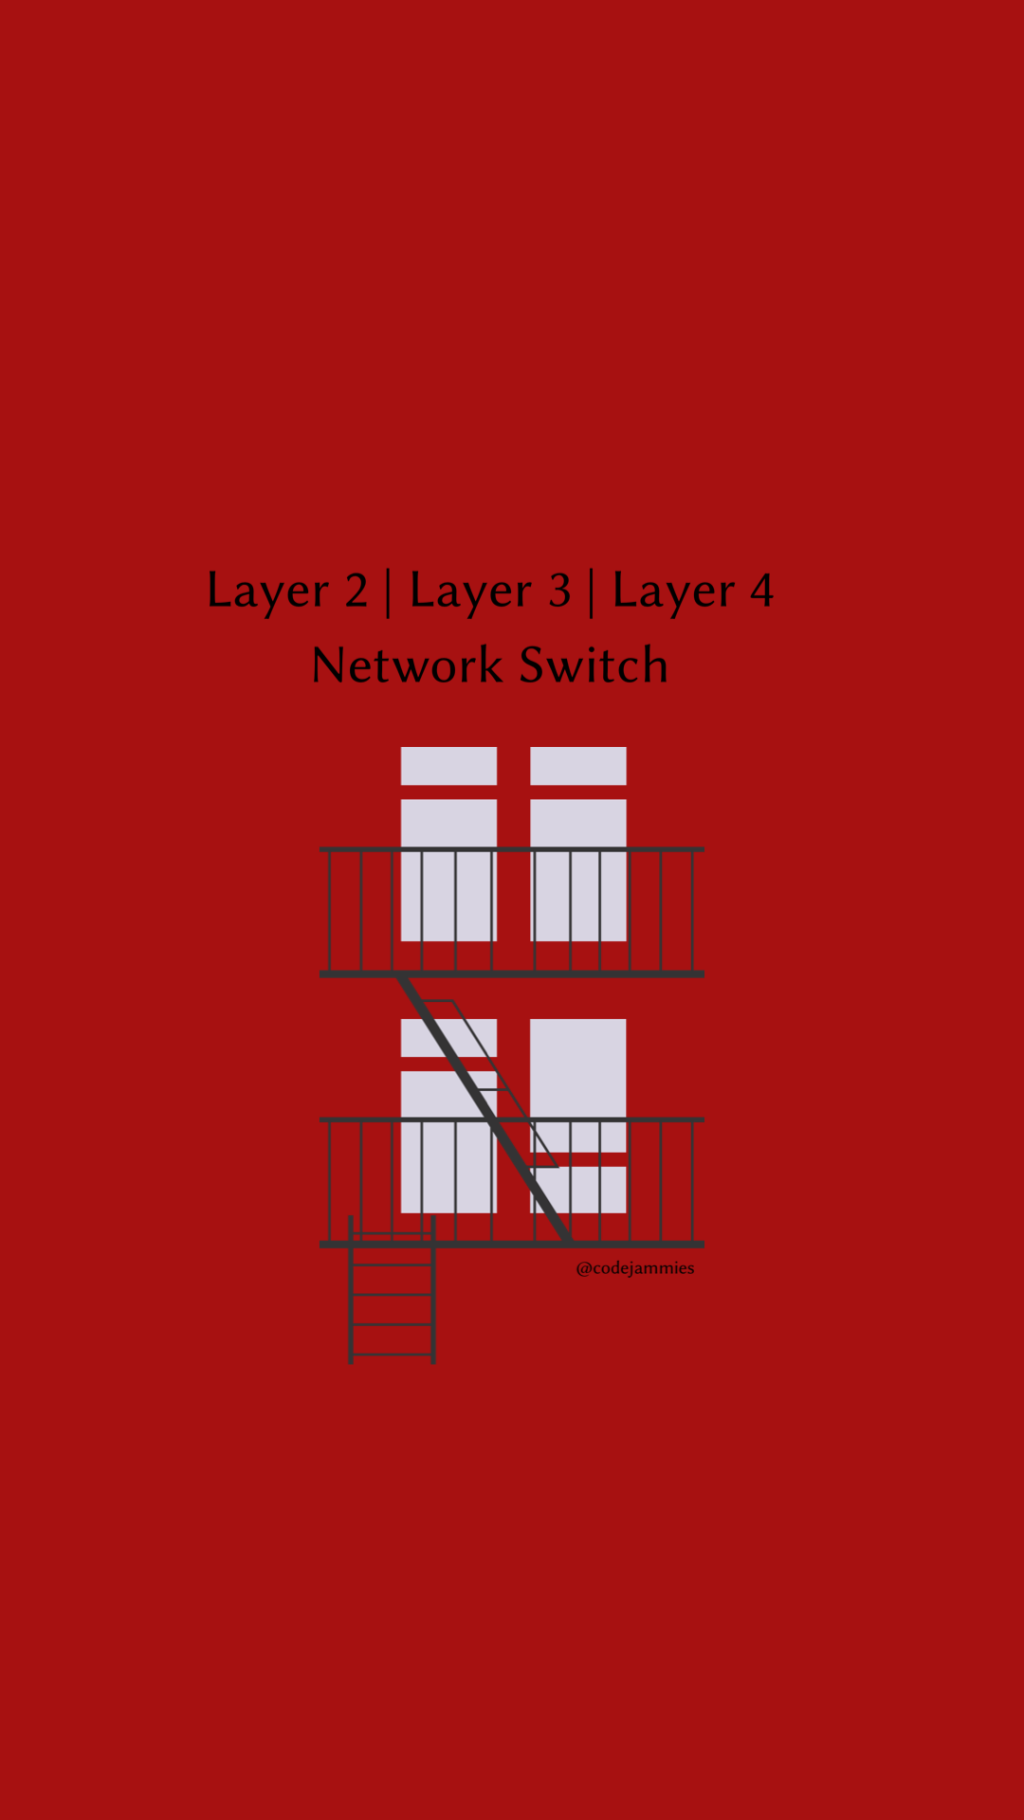 30 Seconds Read: Network Switches (Layer 2 | Layer 3 | Layer 4)